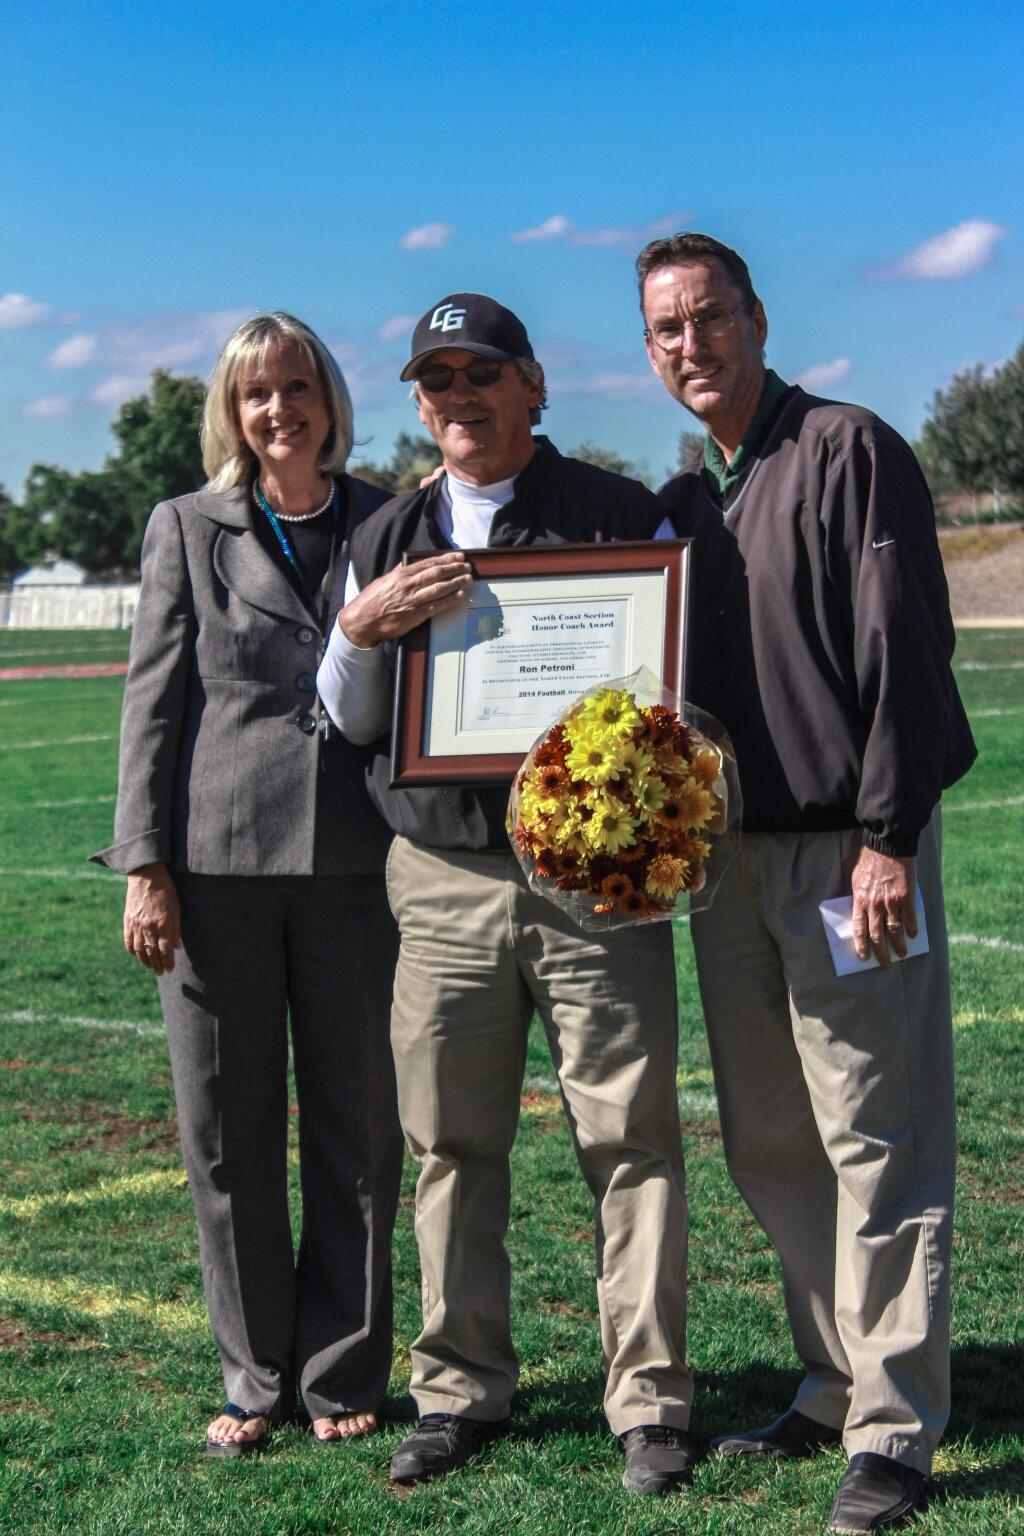 North Coast Section Honor Coach Ron Petroni (center) is flanked by Casa Grande Principal Linda Scheele and athletic director and former football head coach Rick O'Brien as the award is presented to him before the Casa student body.